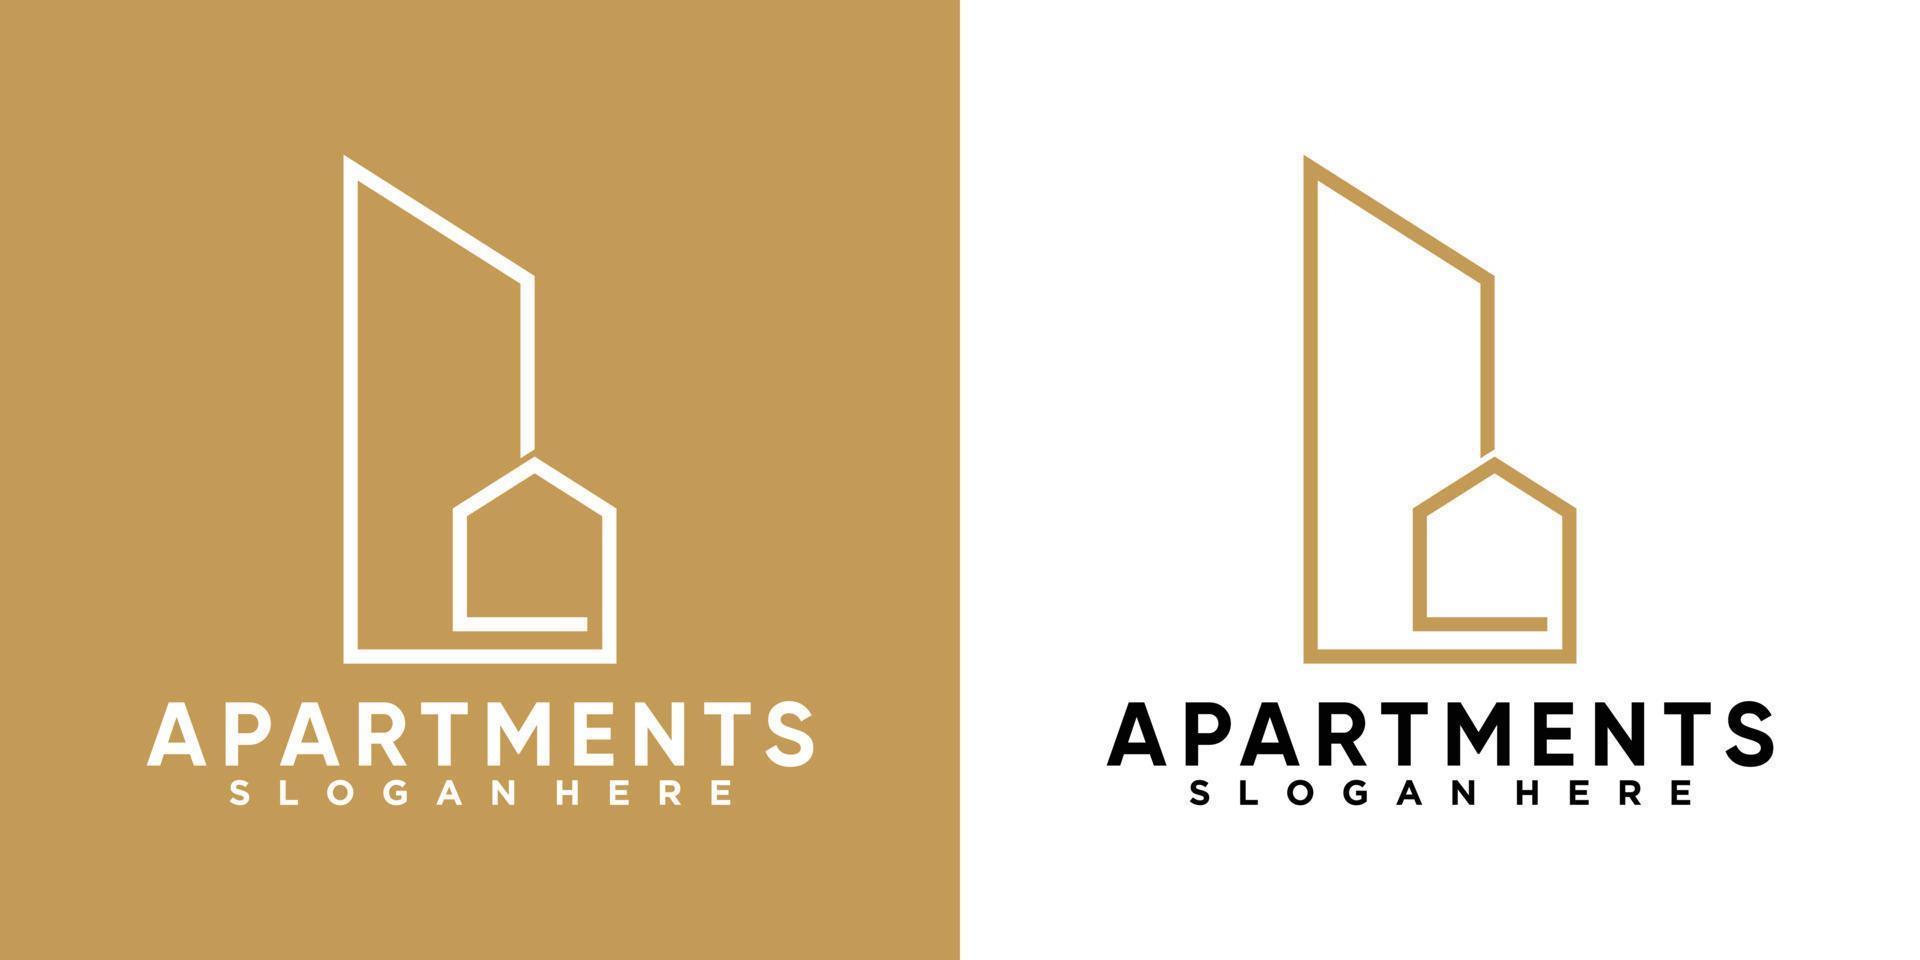 apartments logo design with style and creative concept vector